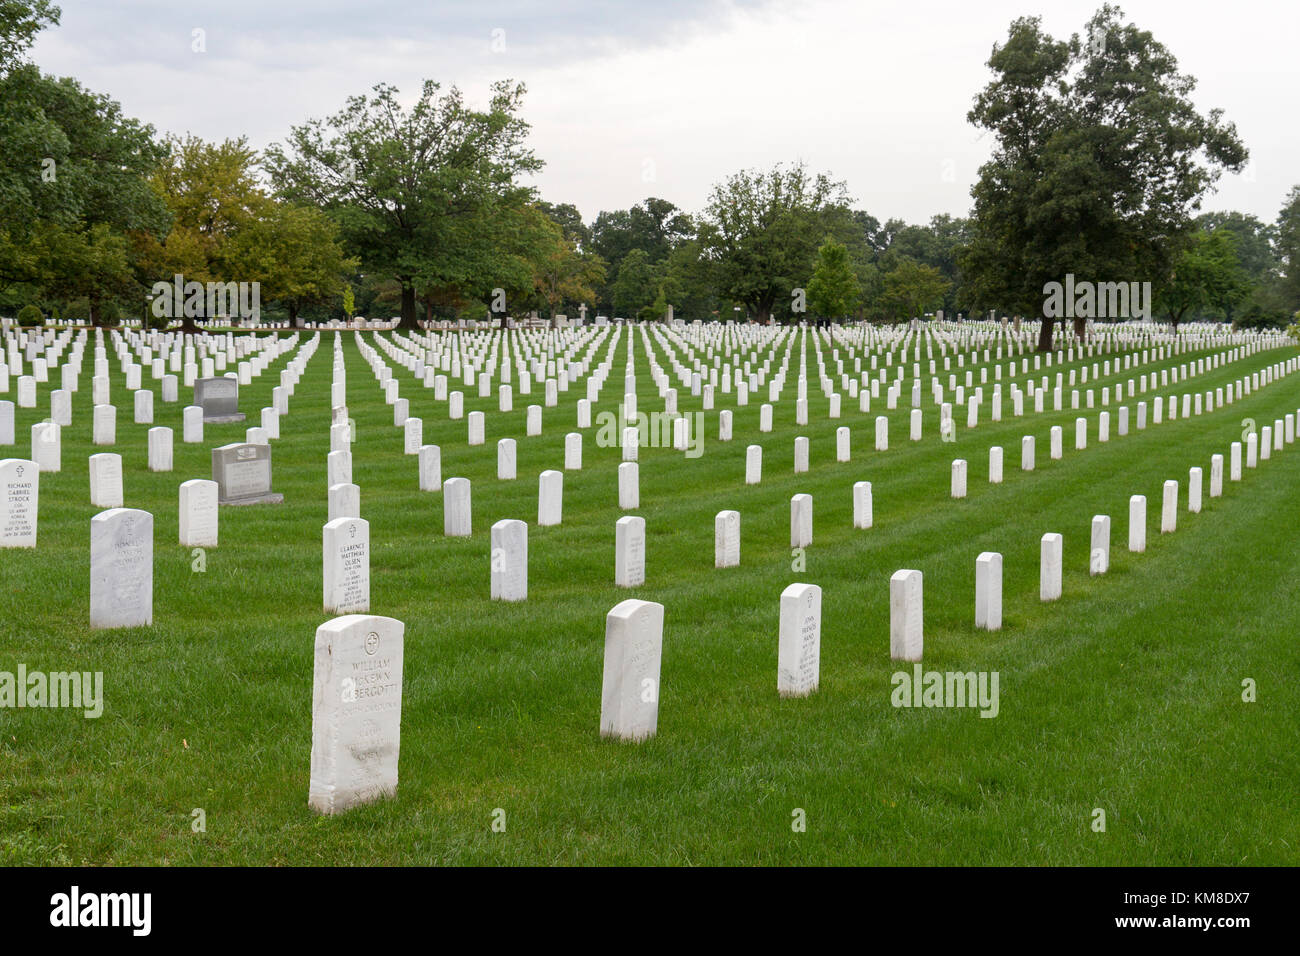 General view across headstones in the Arlington National Cemetery, Virginia, United States. Stock Photo